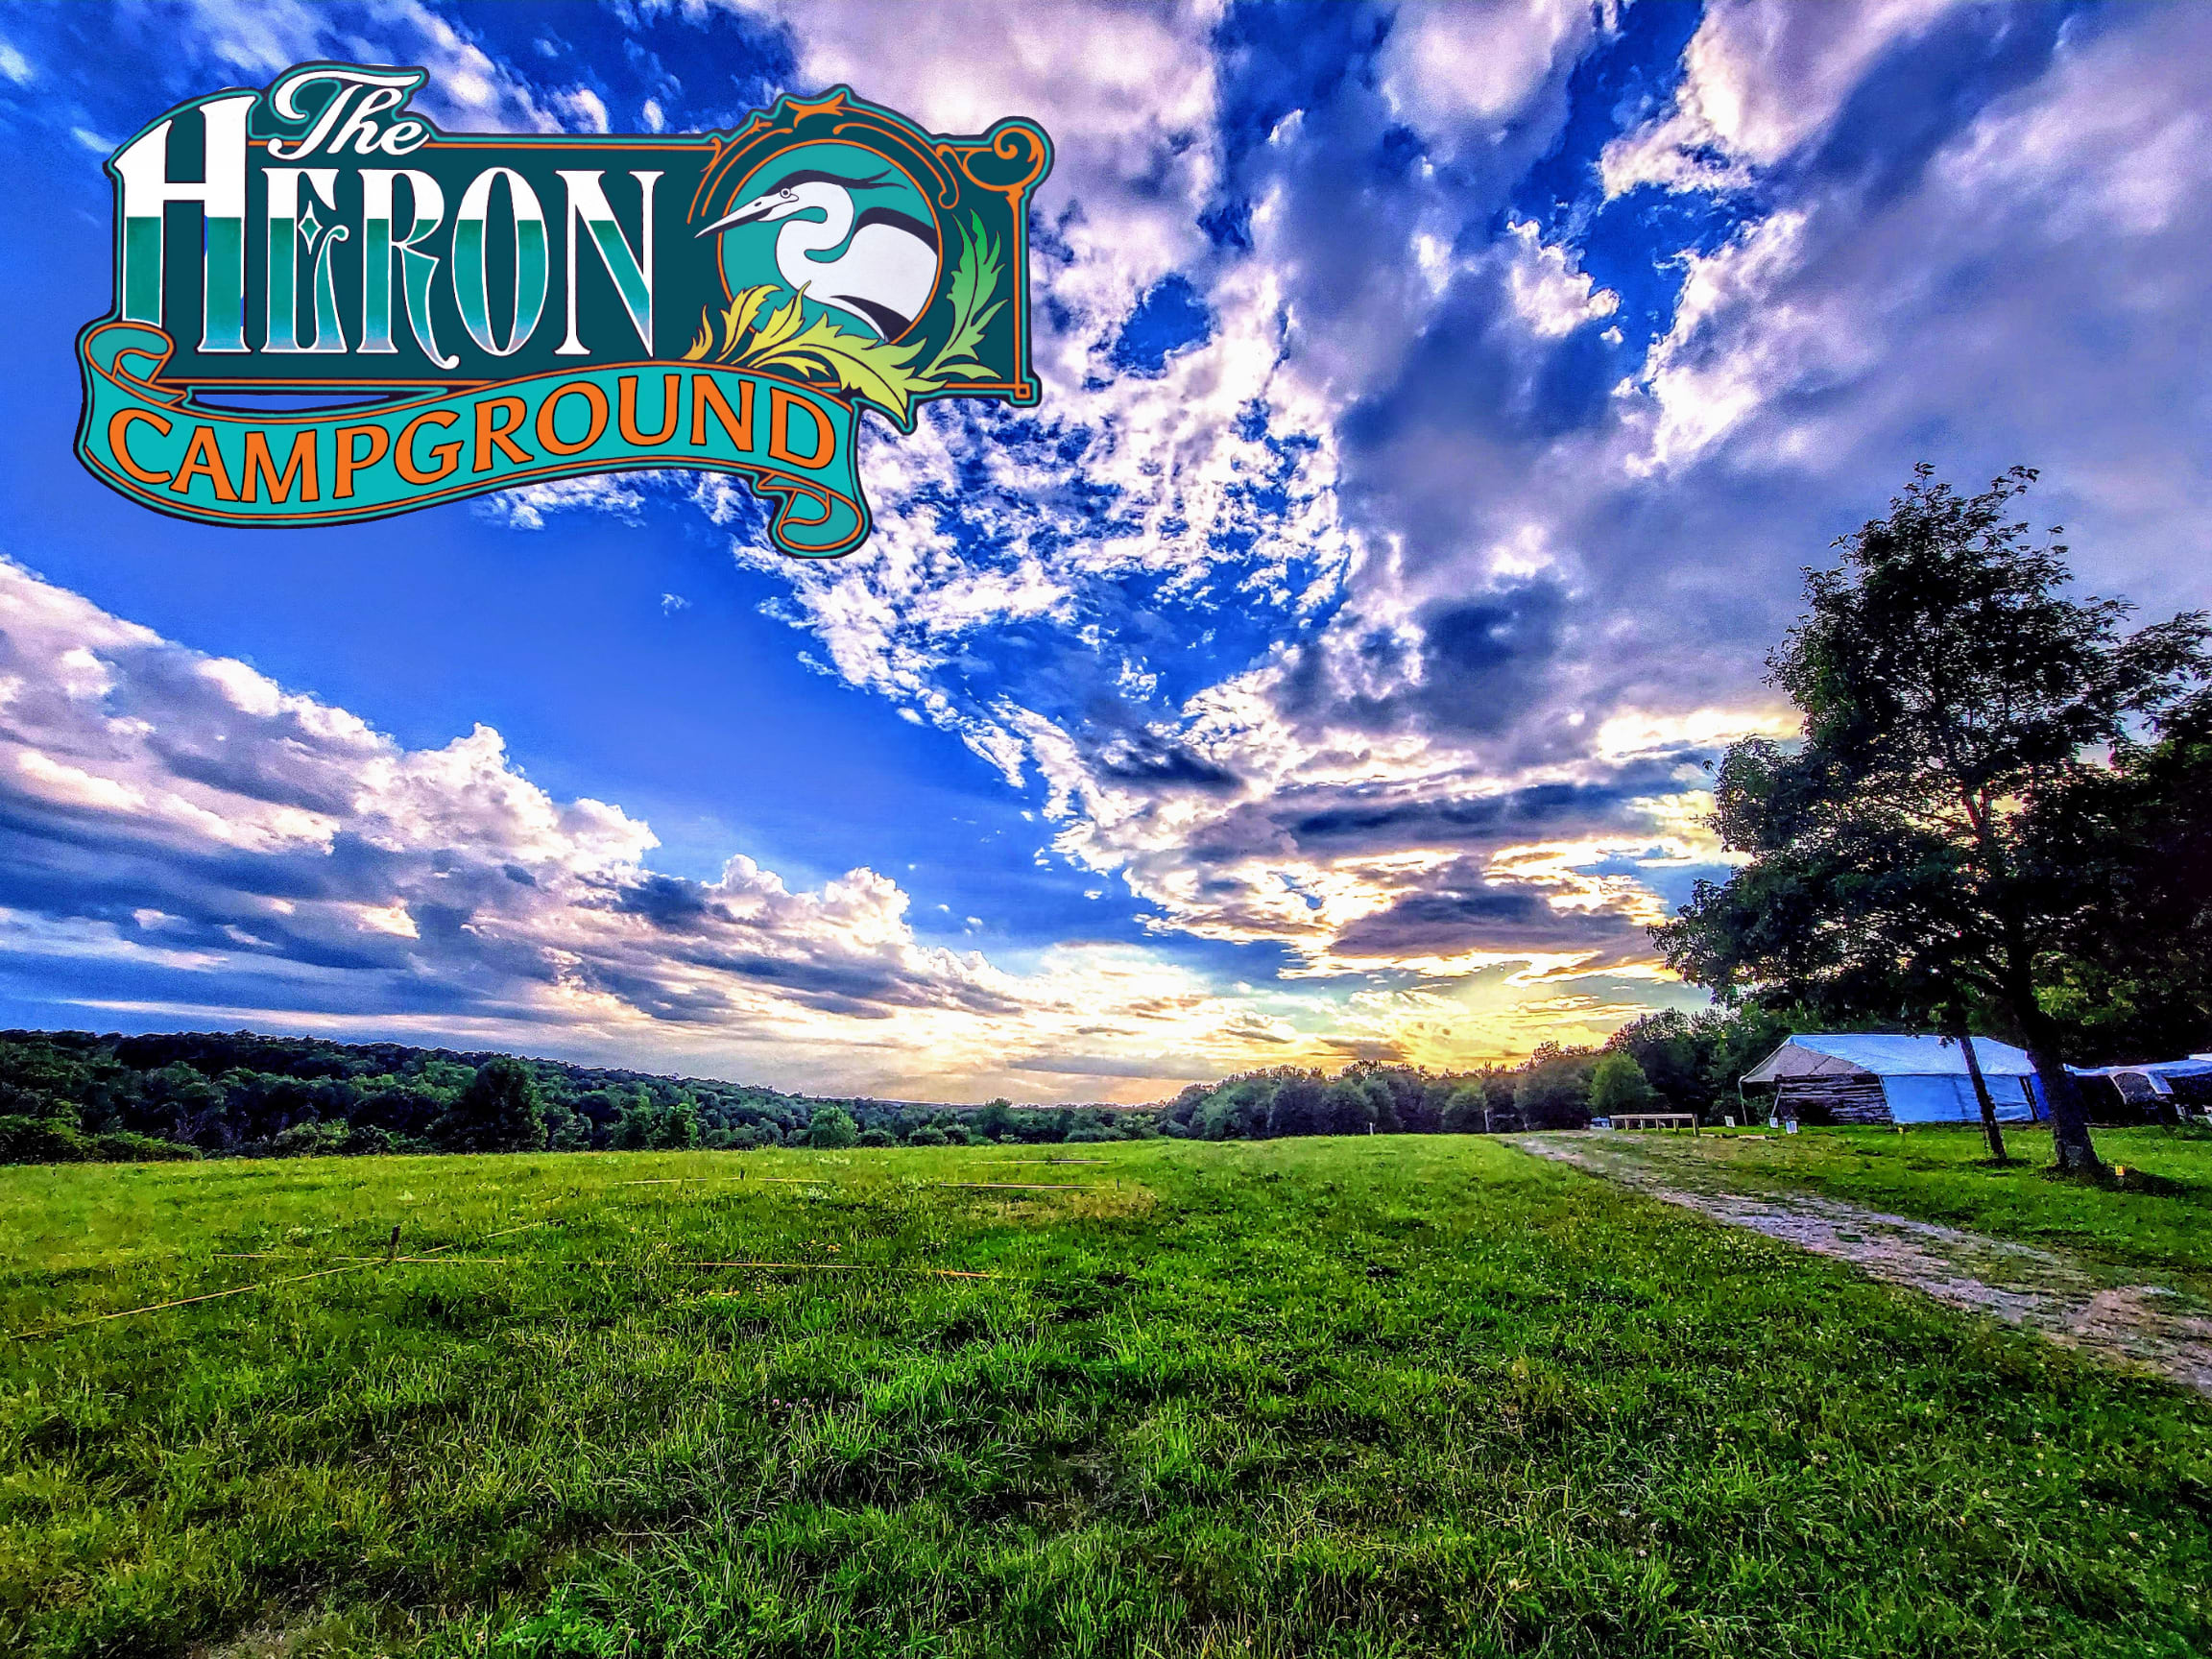 The Heron Electric RV Camping